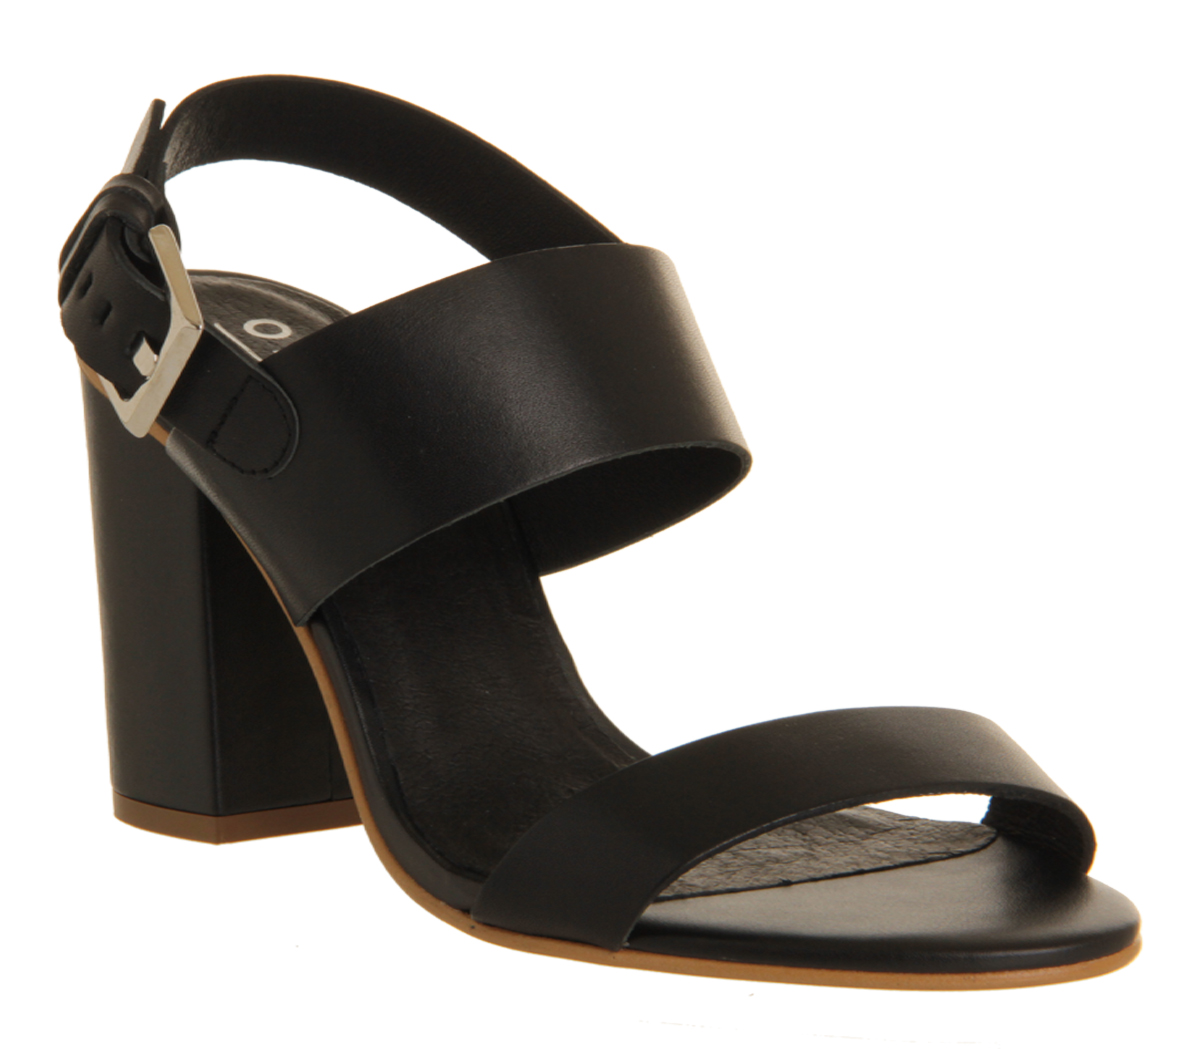 OFFICEGarland Strappy Block HeelsBlack Leather